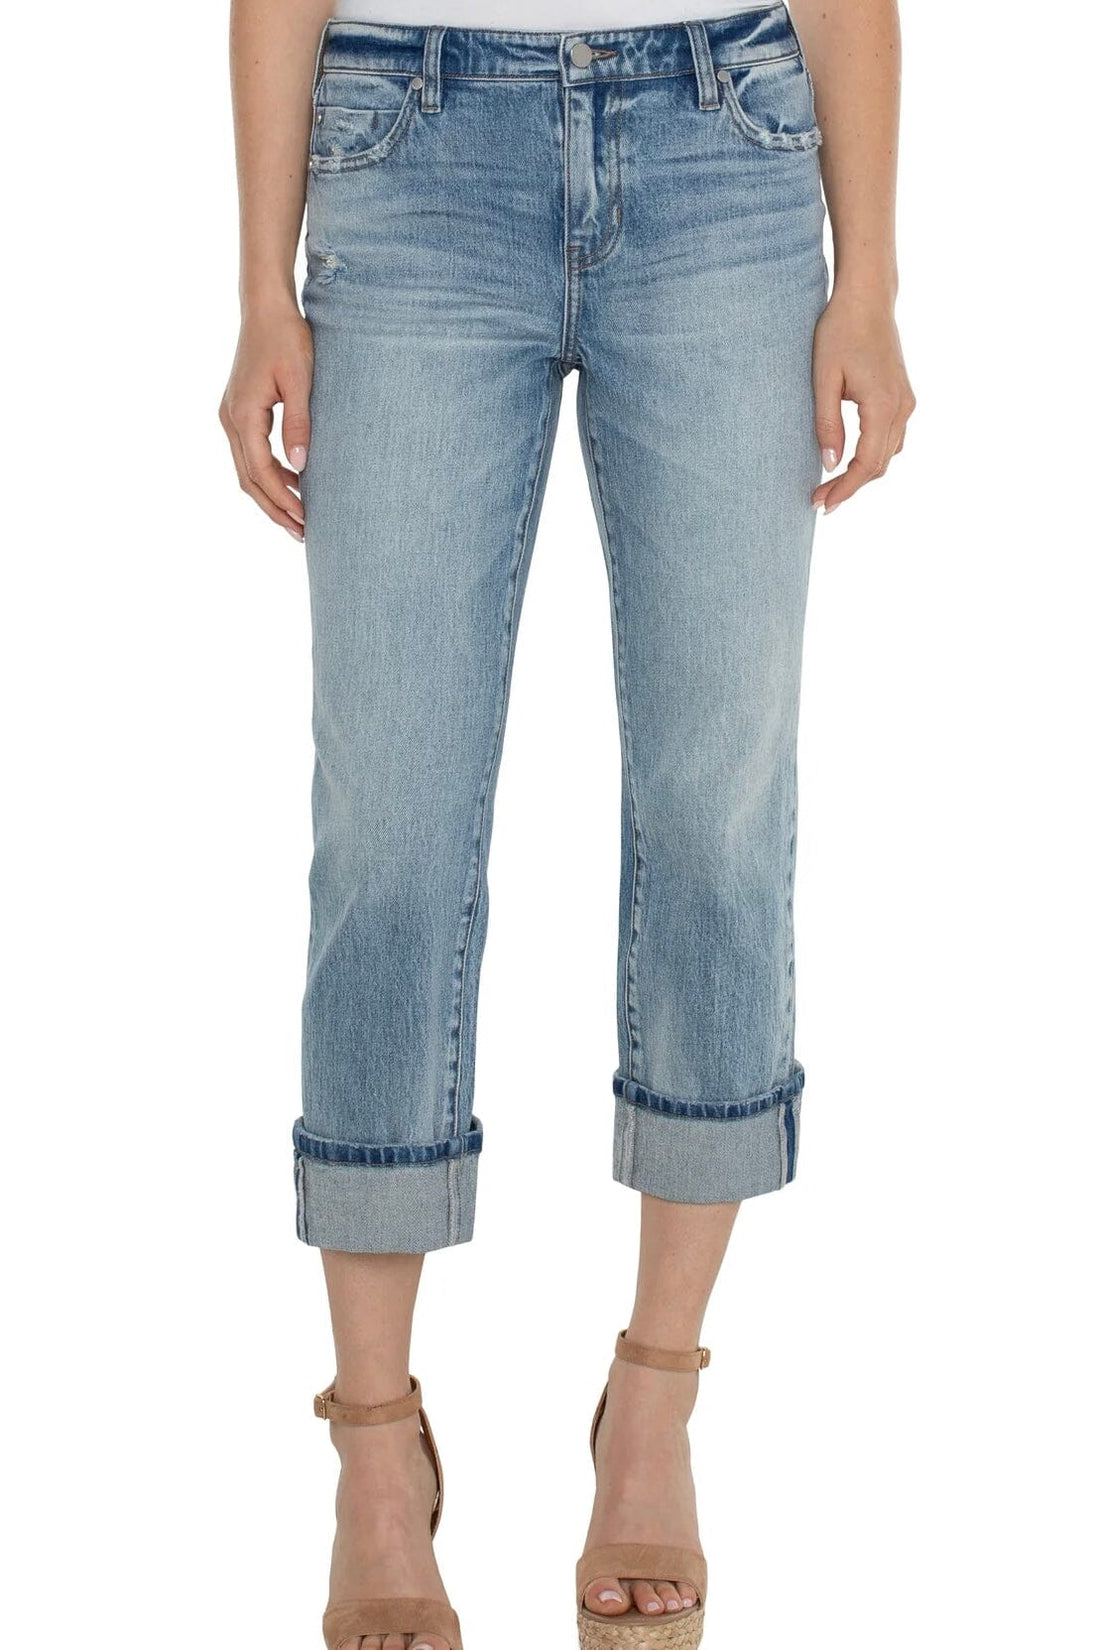 Marley Girlfriend Cuffed With Back Seam JEANS LIVERPOOL 